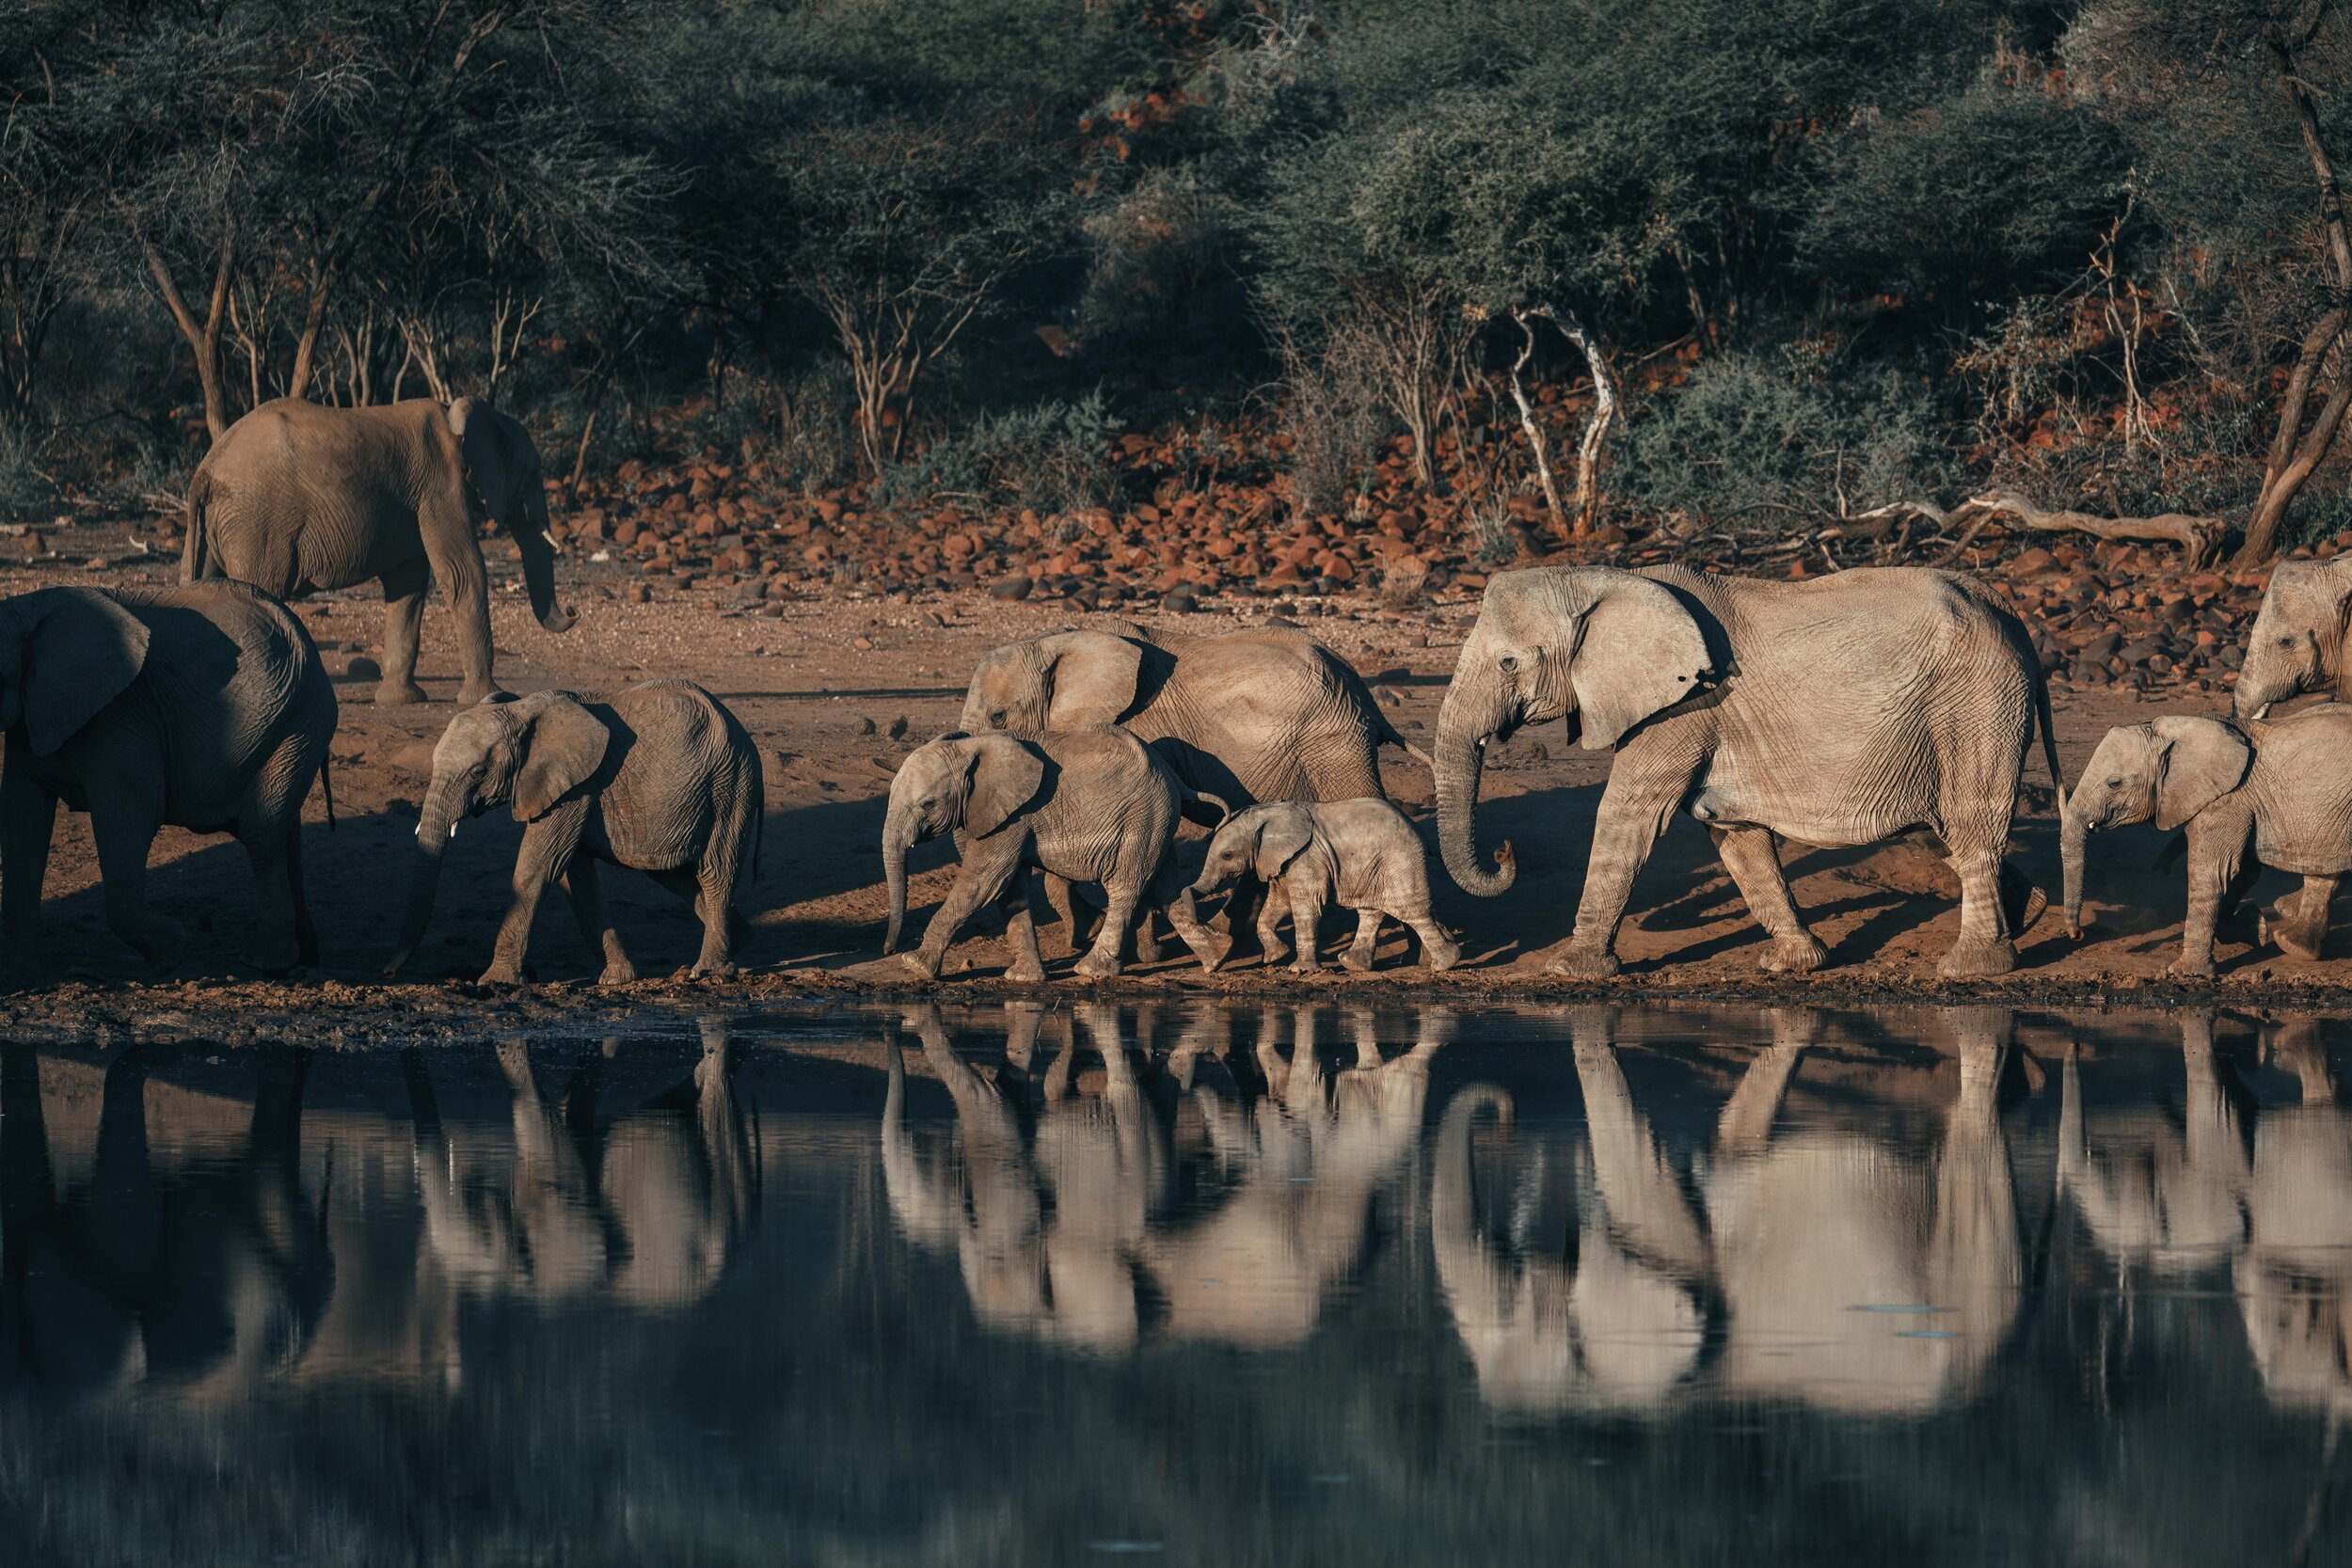  Incredibly humbling moment where a huge group of elephants came for refreshments at a waterhole 